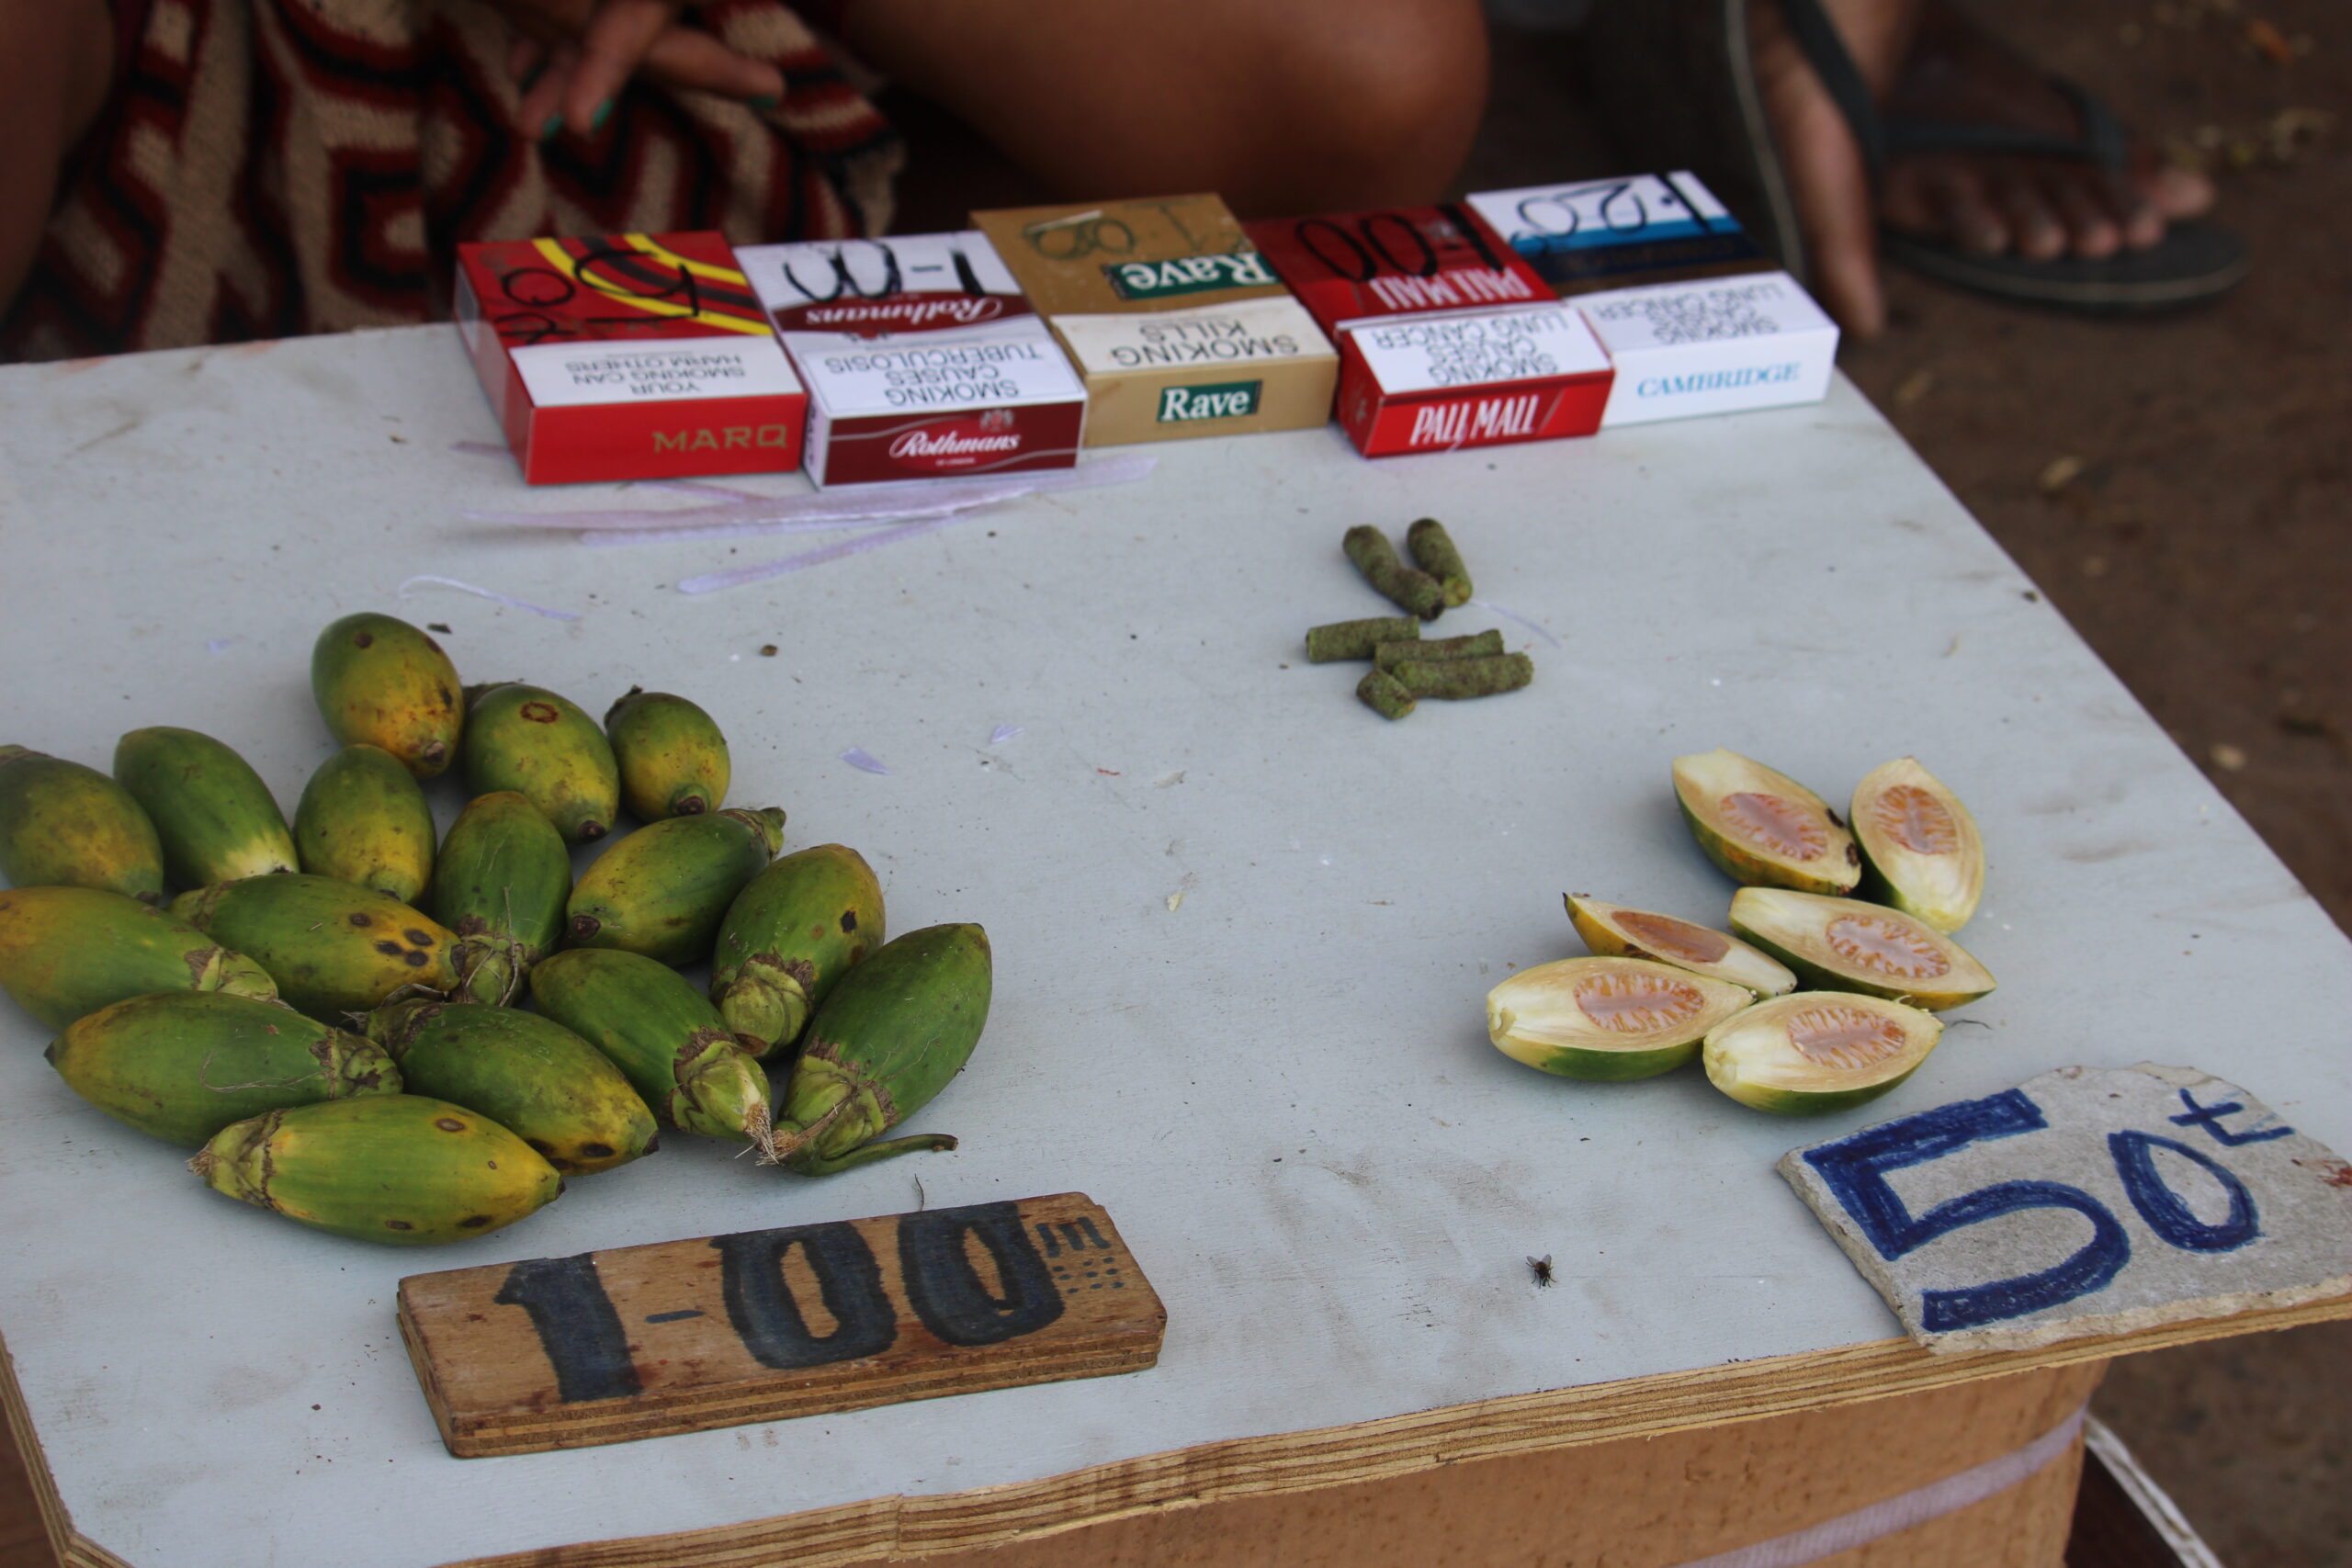 buai at the market, buai is the legal drug of choice in PNG…